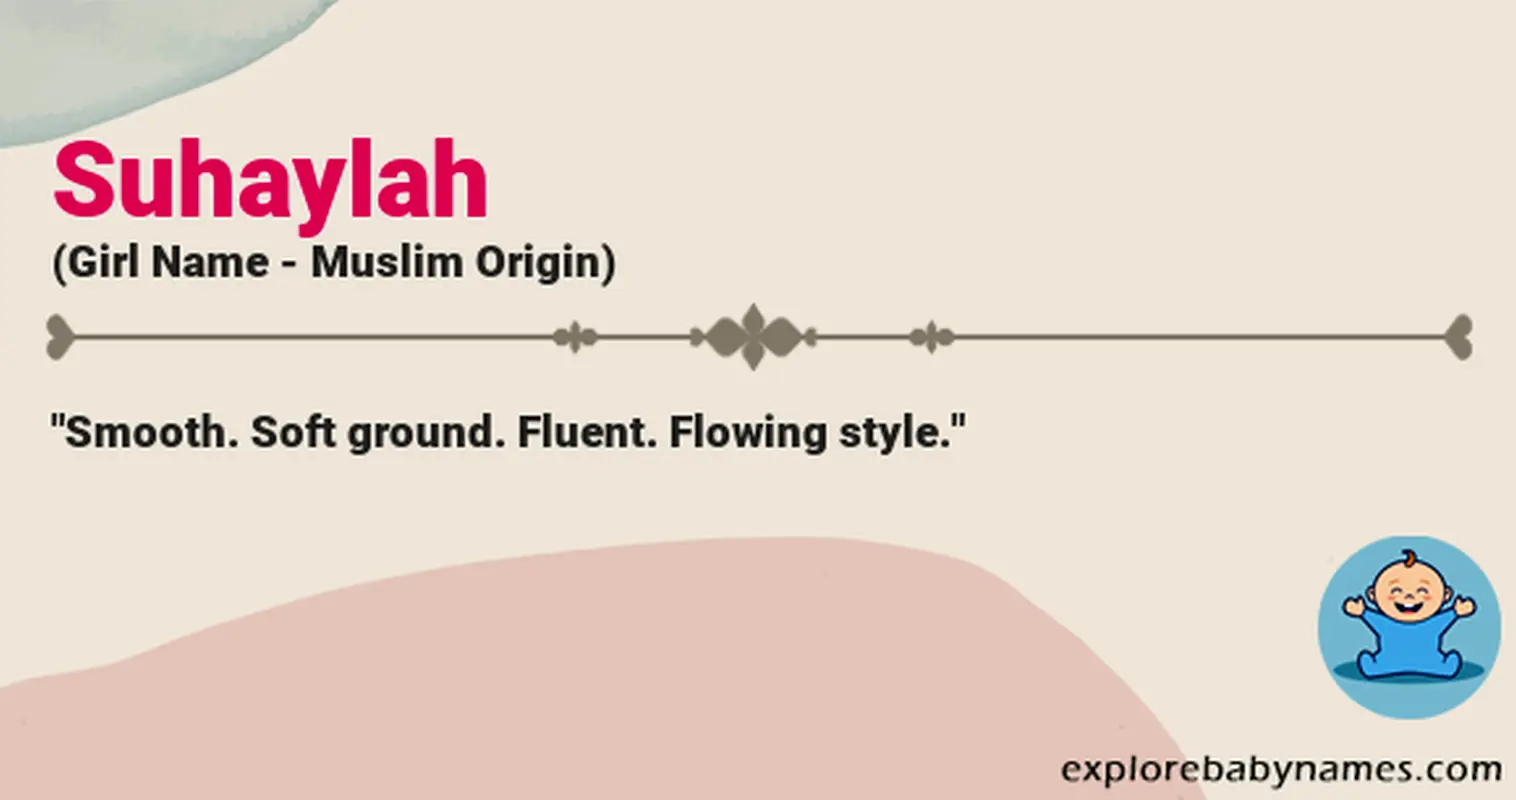 Meaning of Suhaylah